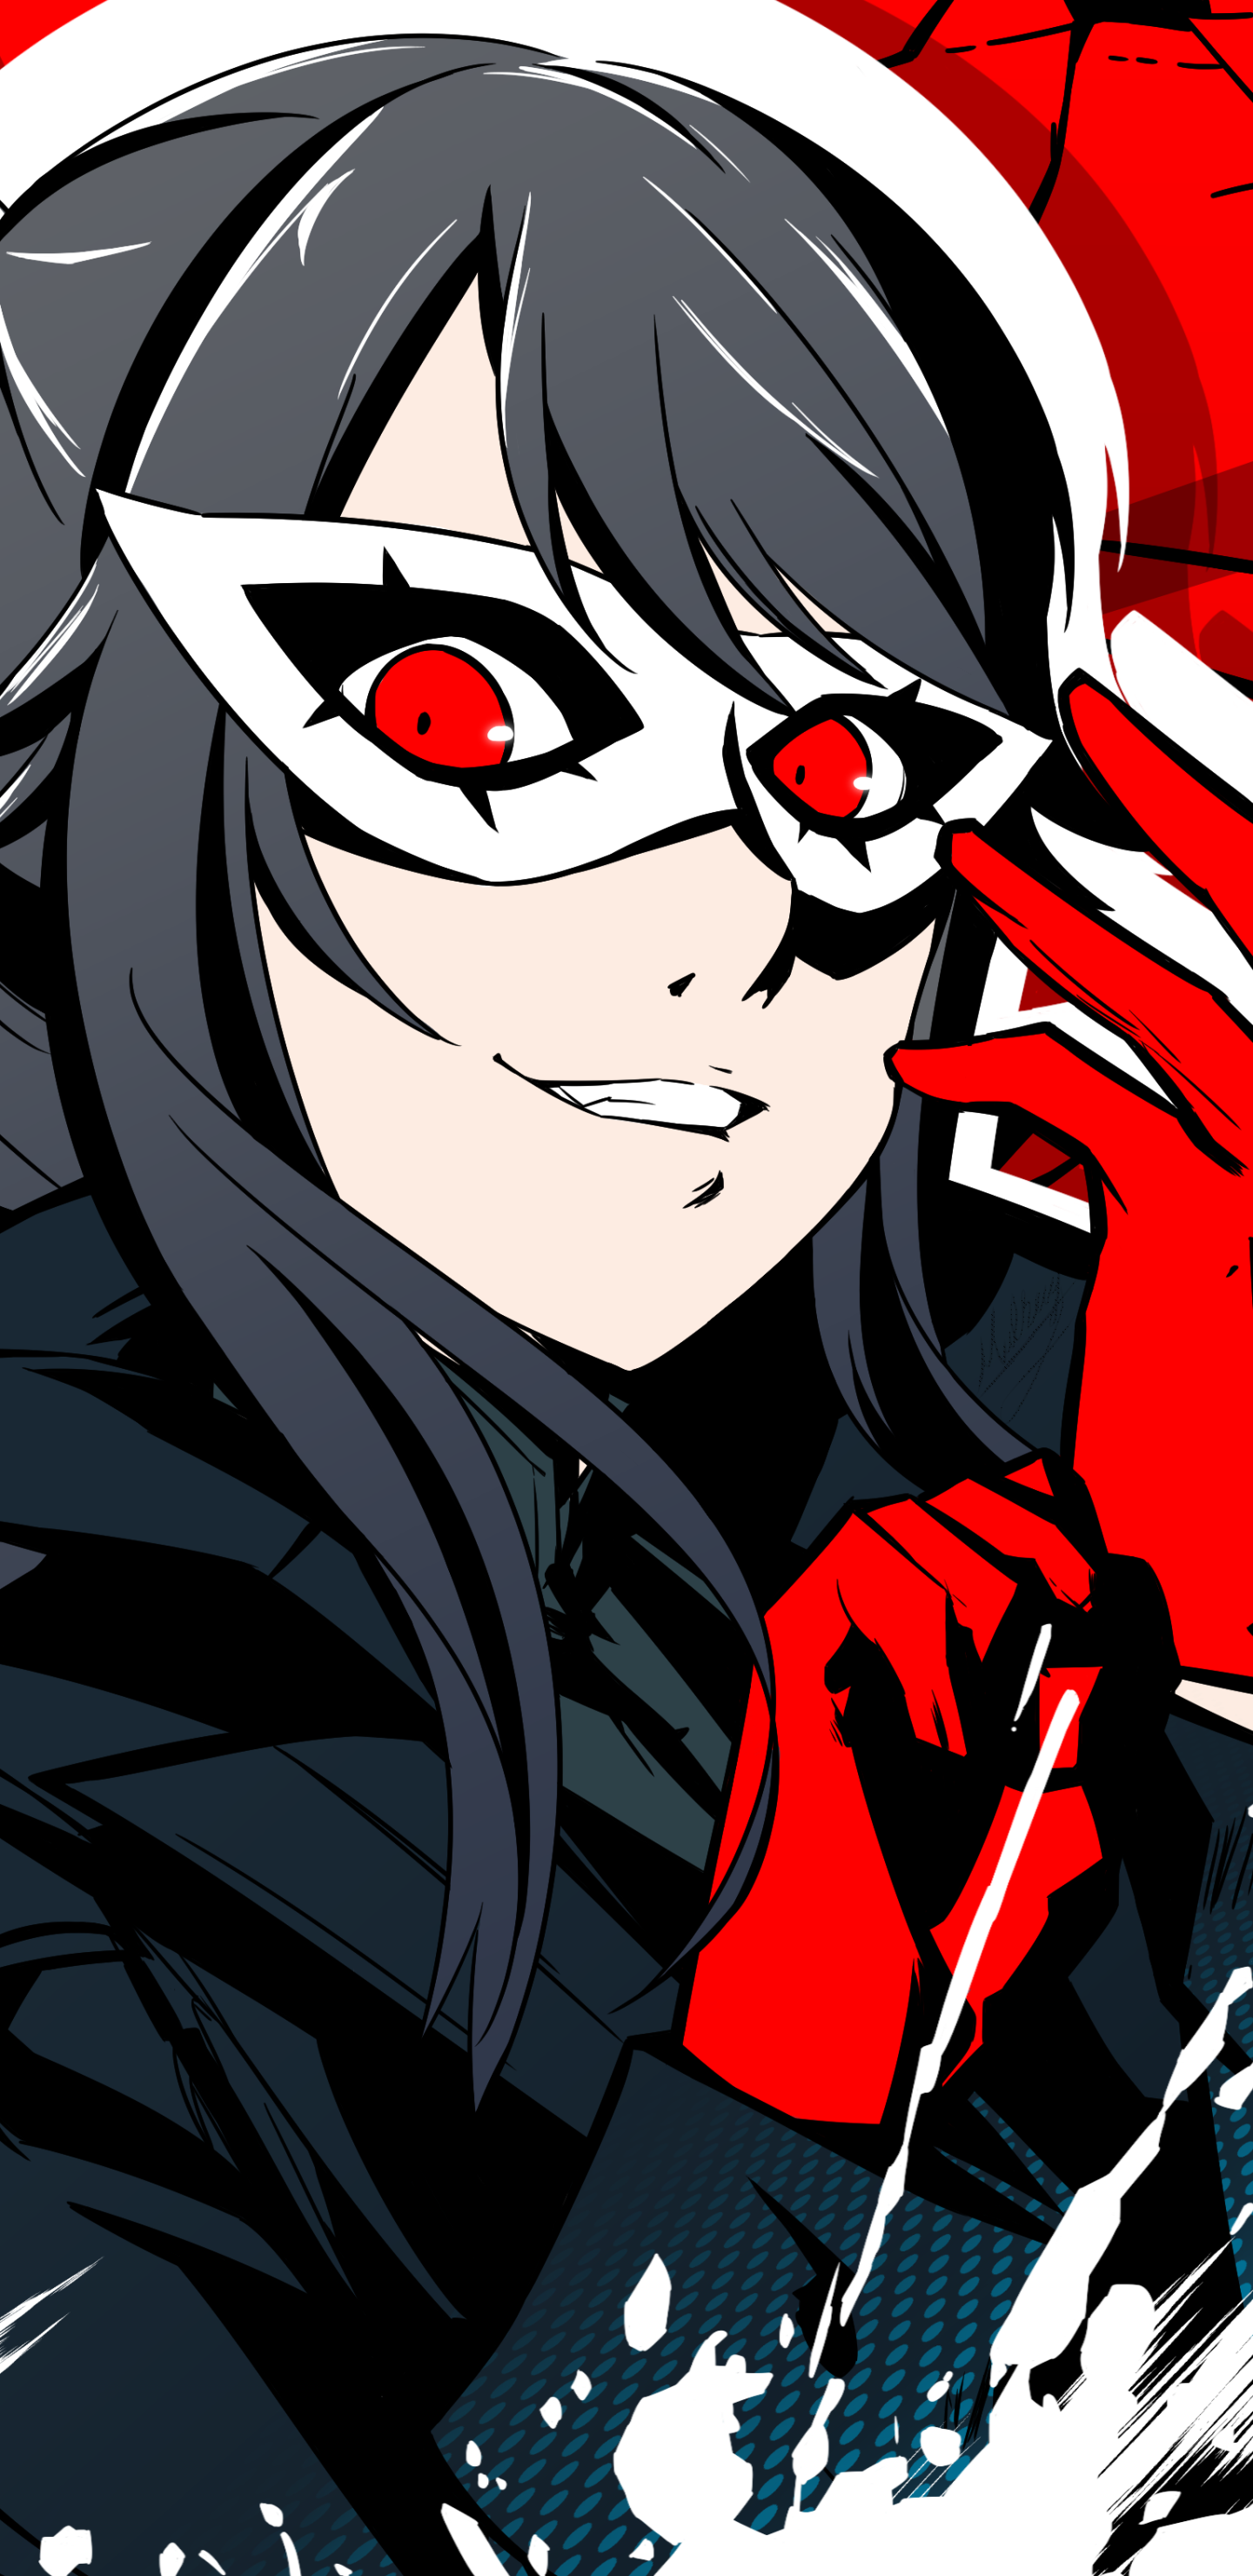 Ayano Aishi Persona 5 crossover - Mobile Abyss